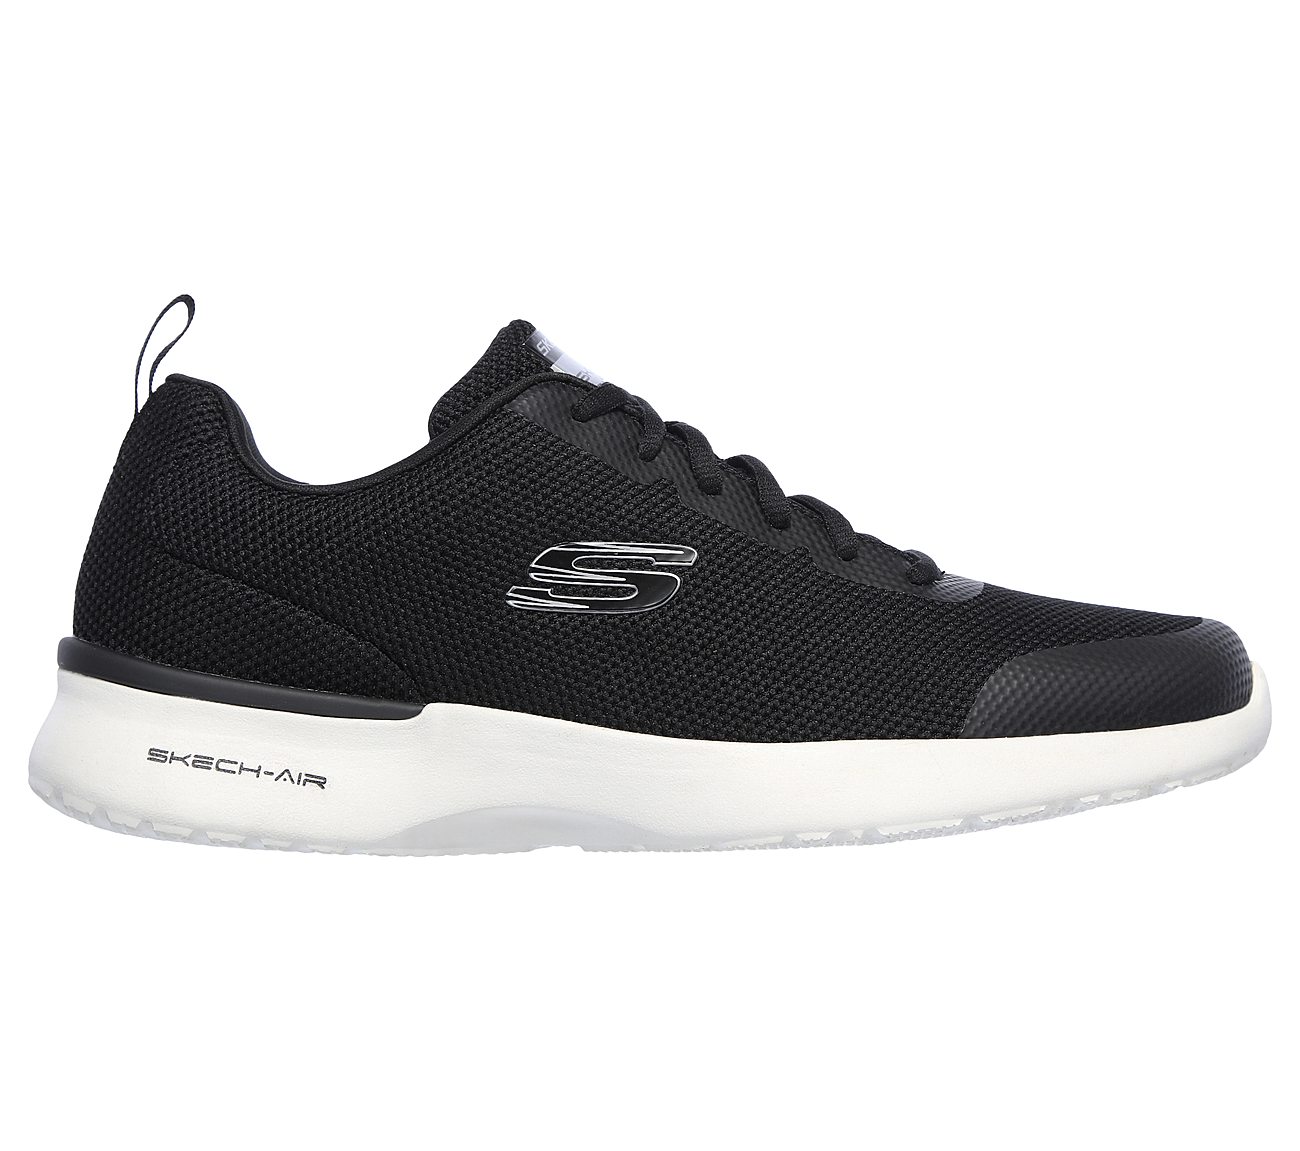 SKECH-AIR DYNAMIGHT - WINLY, BLACK/WHITE Footwear Right View